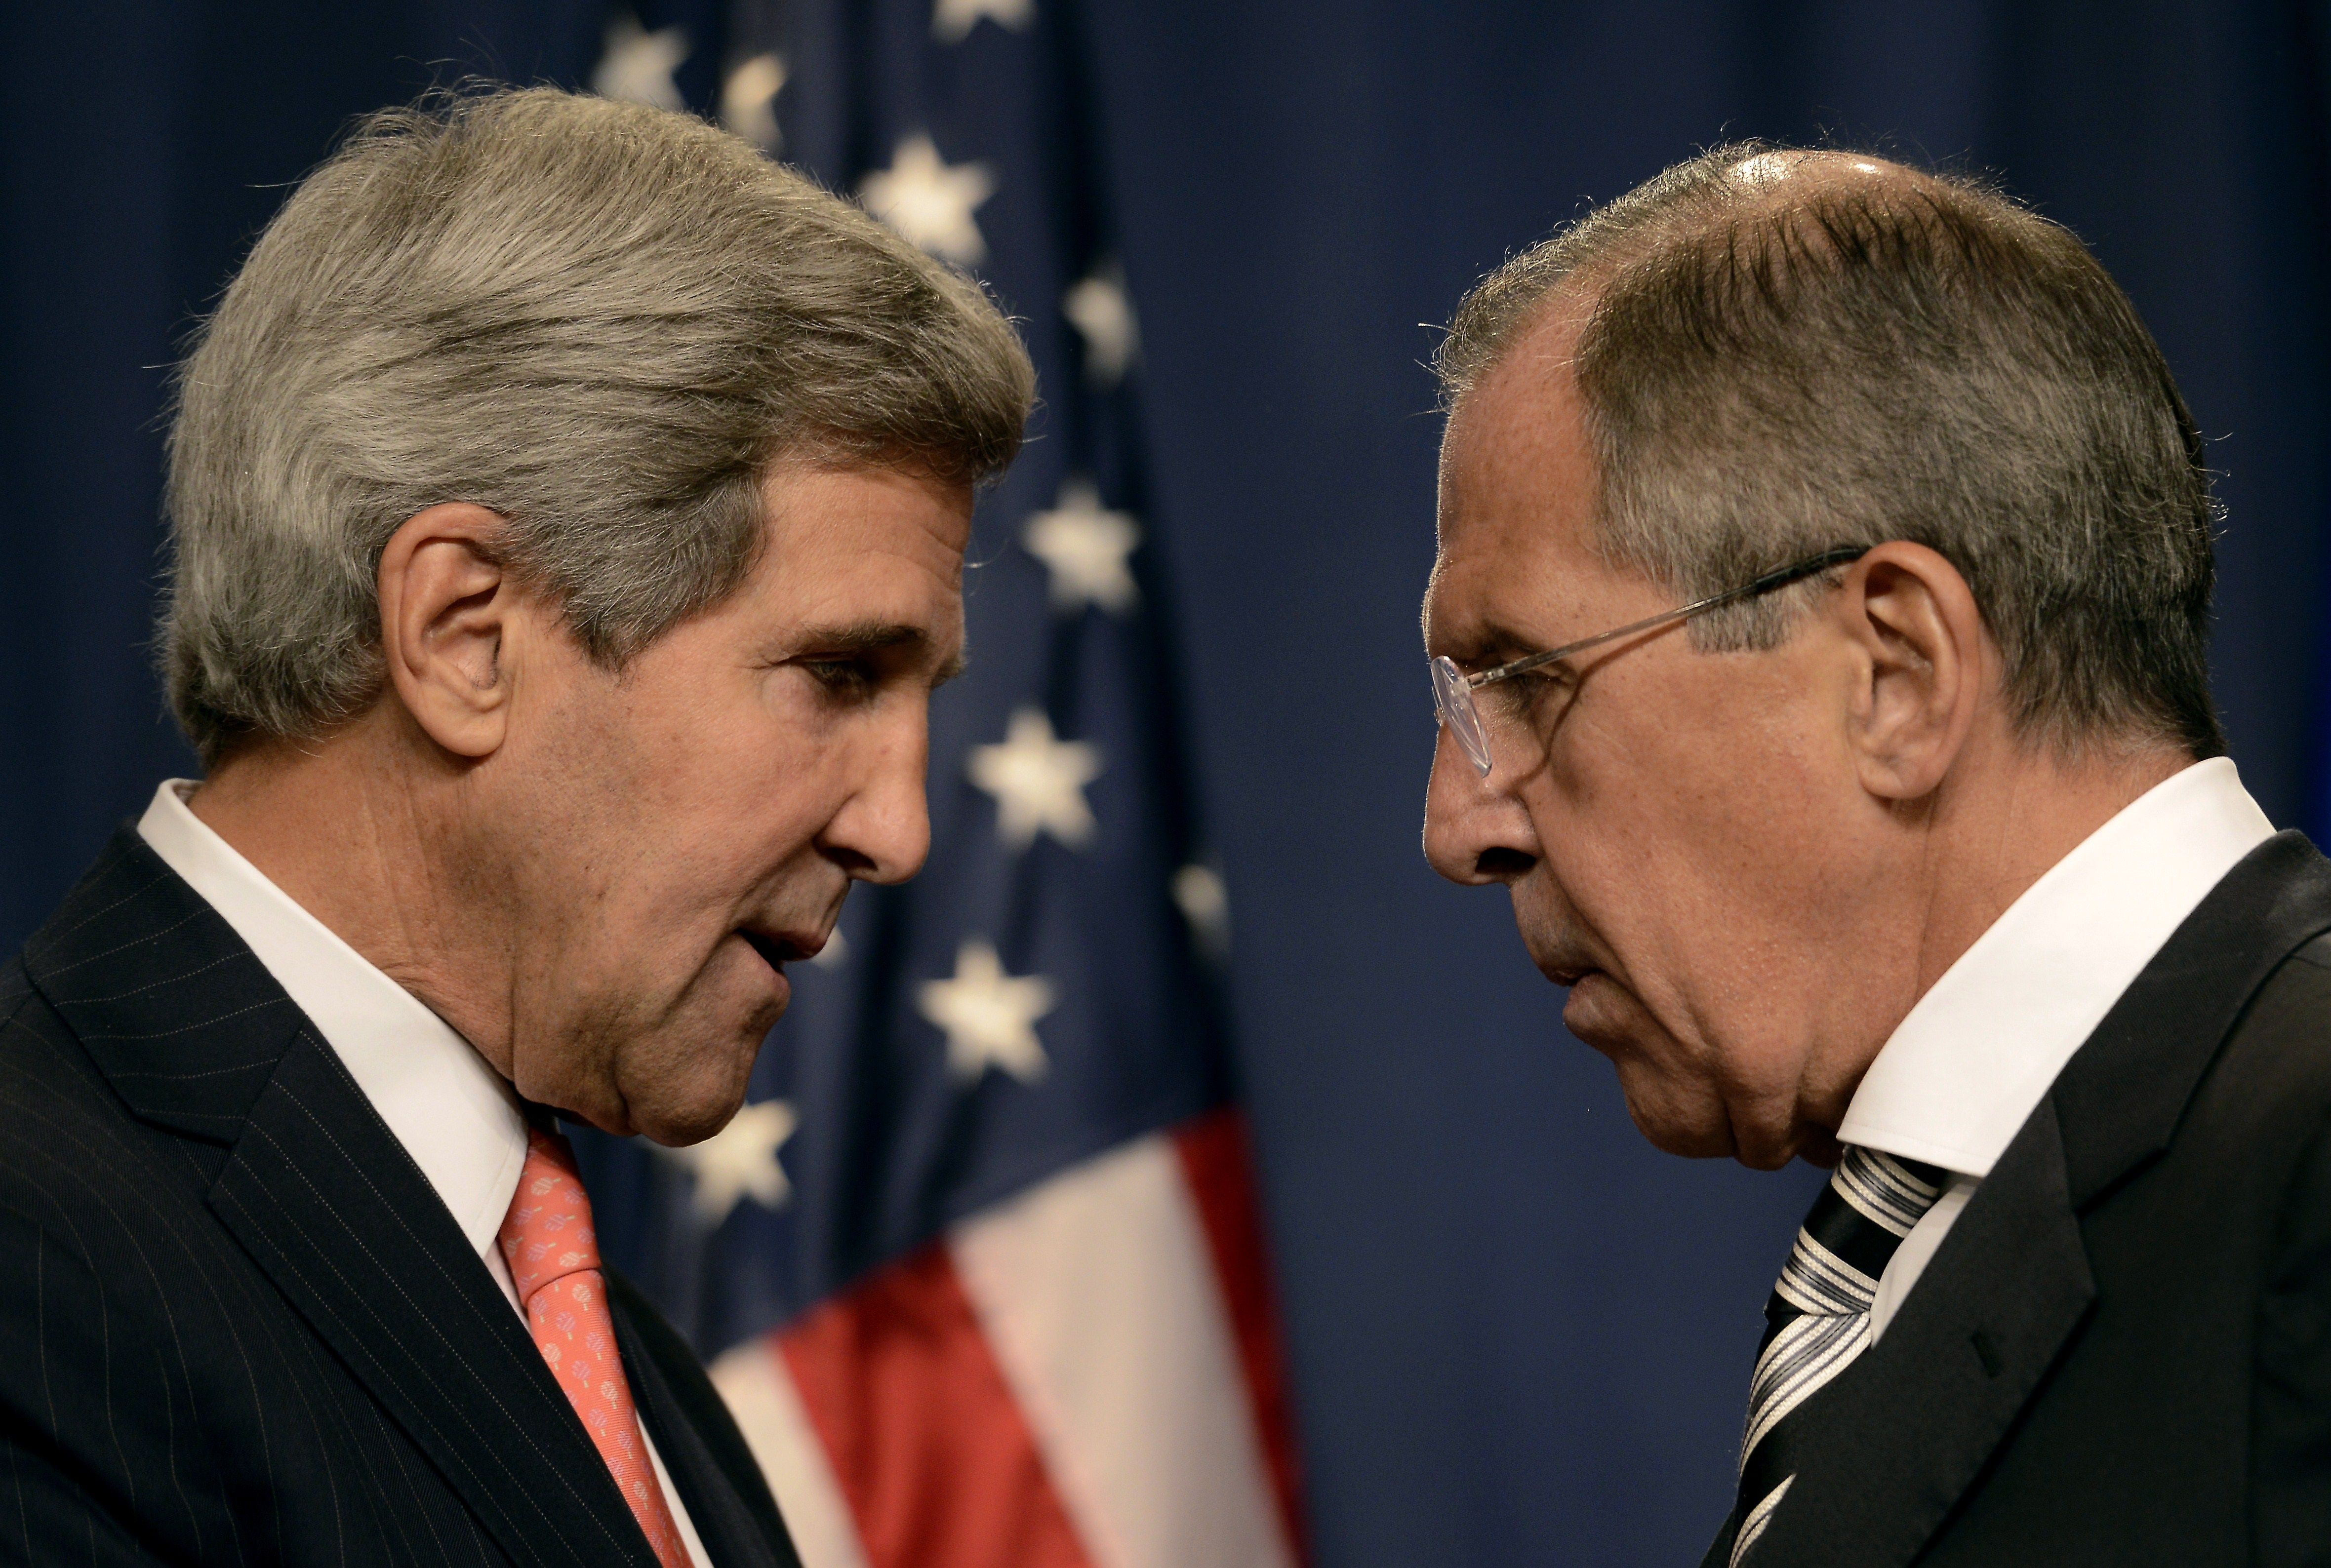 US Secretary of State John Kerry and his Russian counterpart Sergei Lavrov